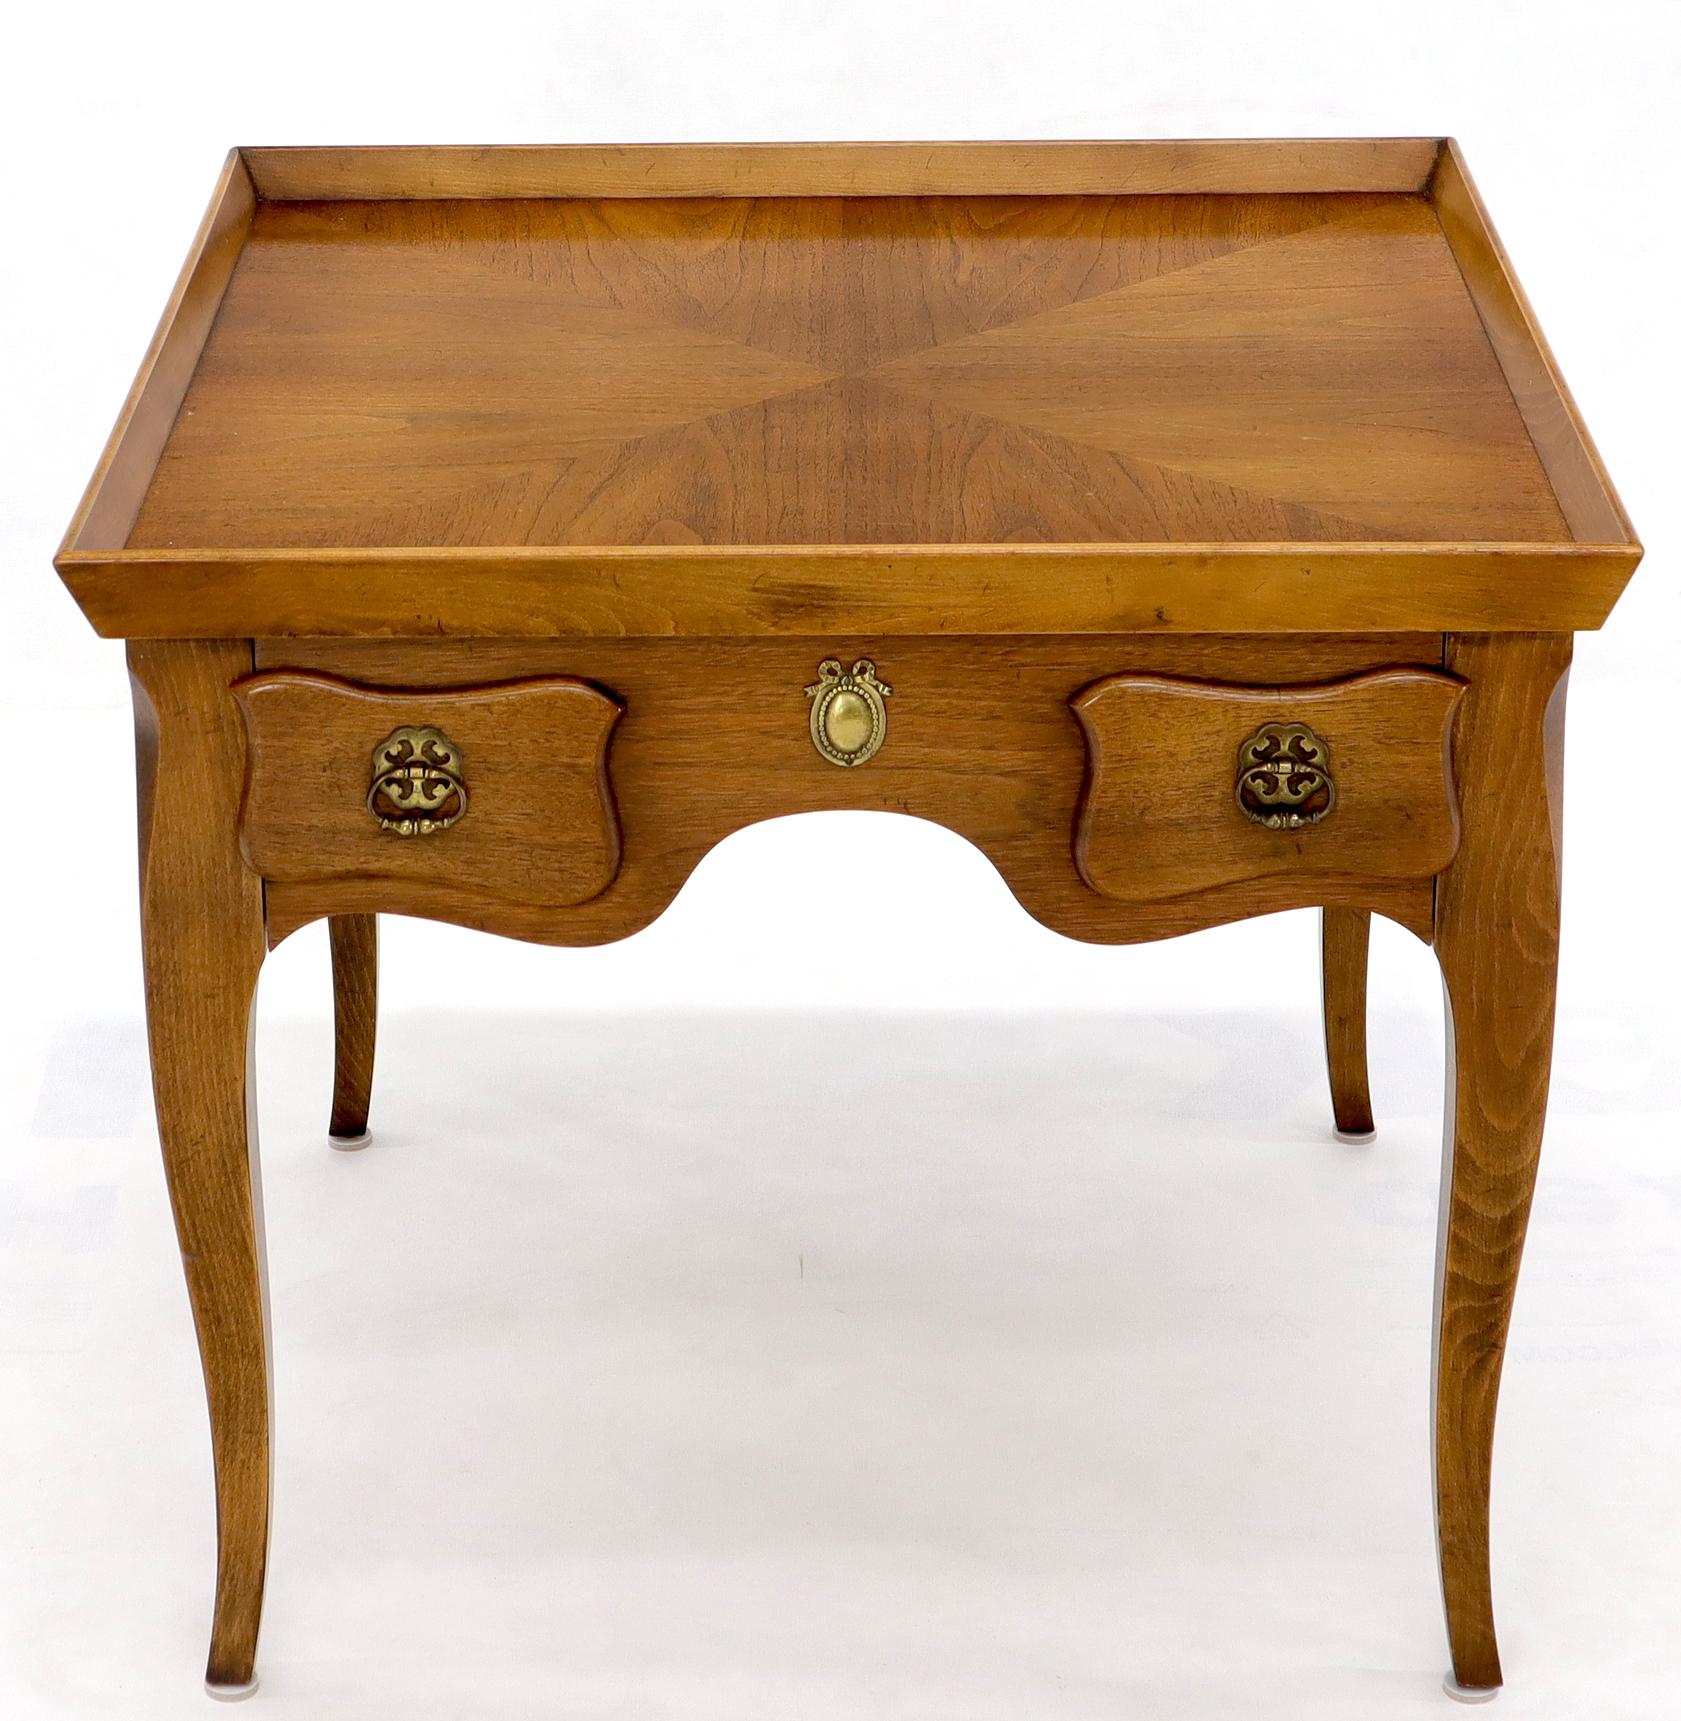 Pair of very fine square tops one drawer book matched end side tables by Baker.